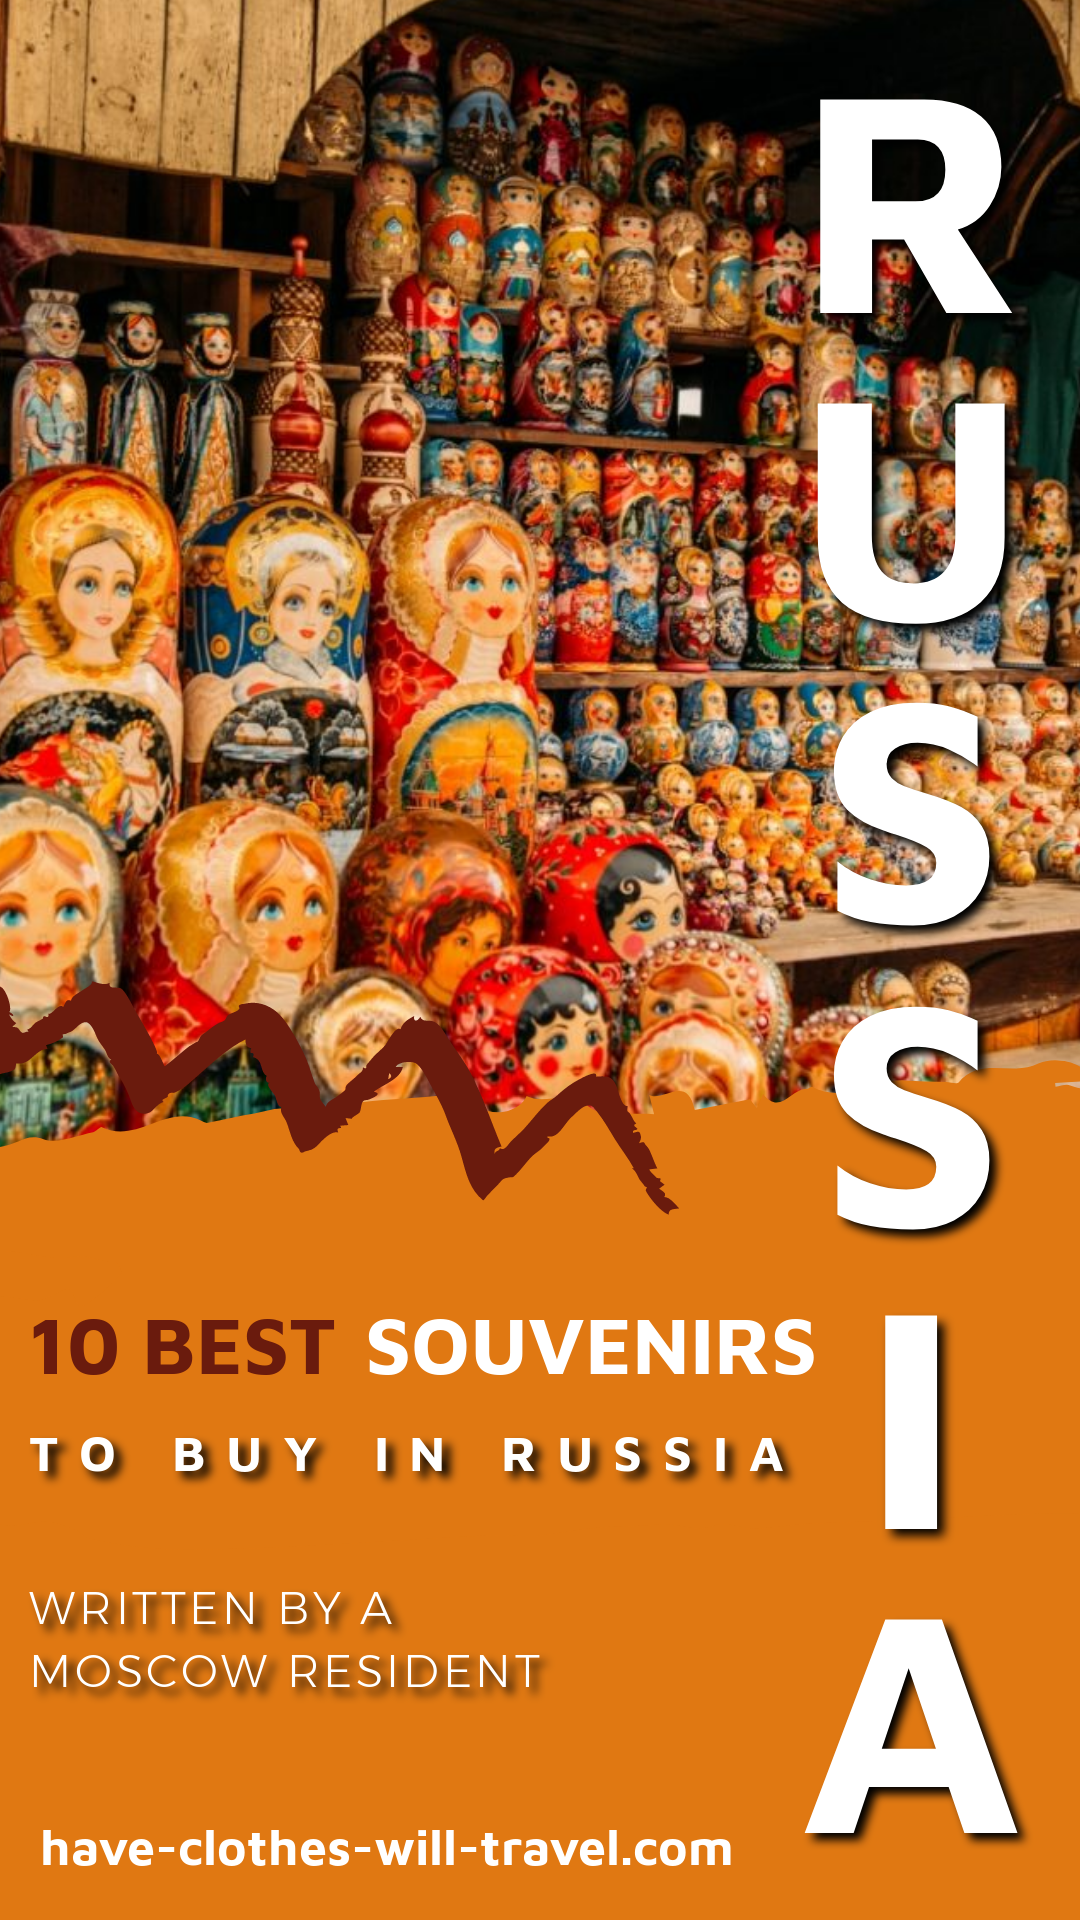 A graphic has an image of Russian dolls on display at a street market. Text over the image says "10 Best Souvenirs to Buy in Russia"